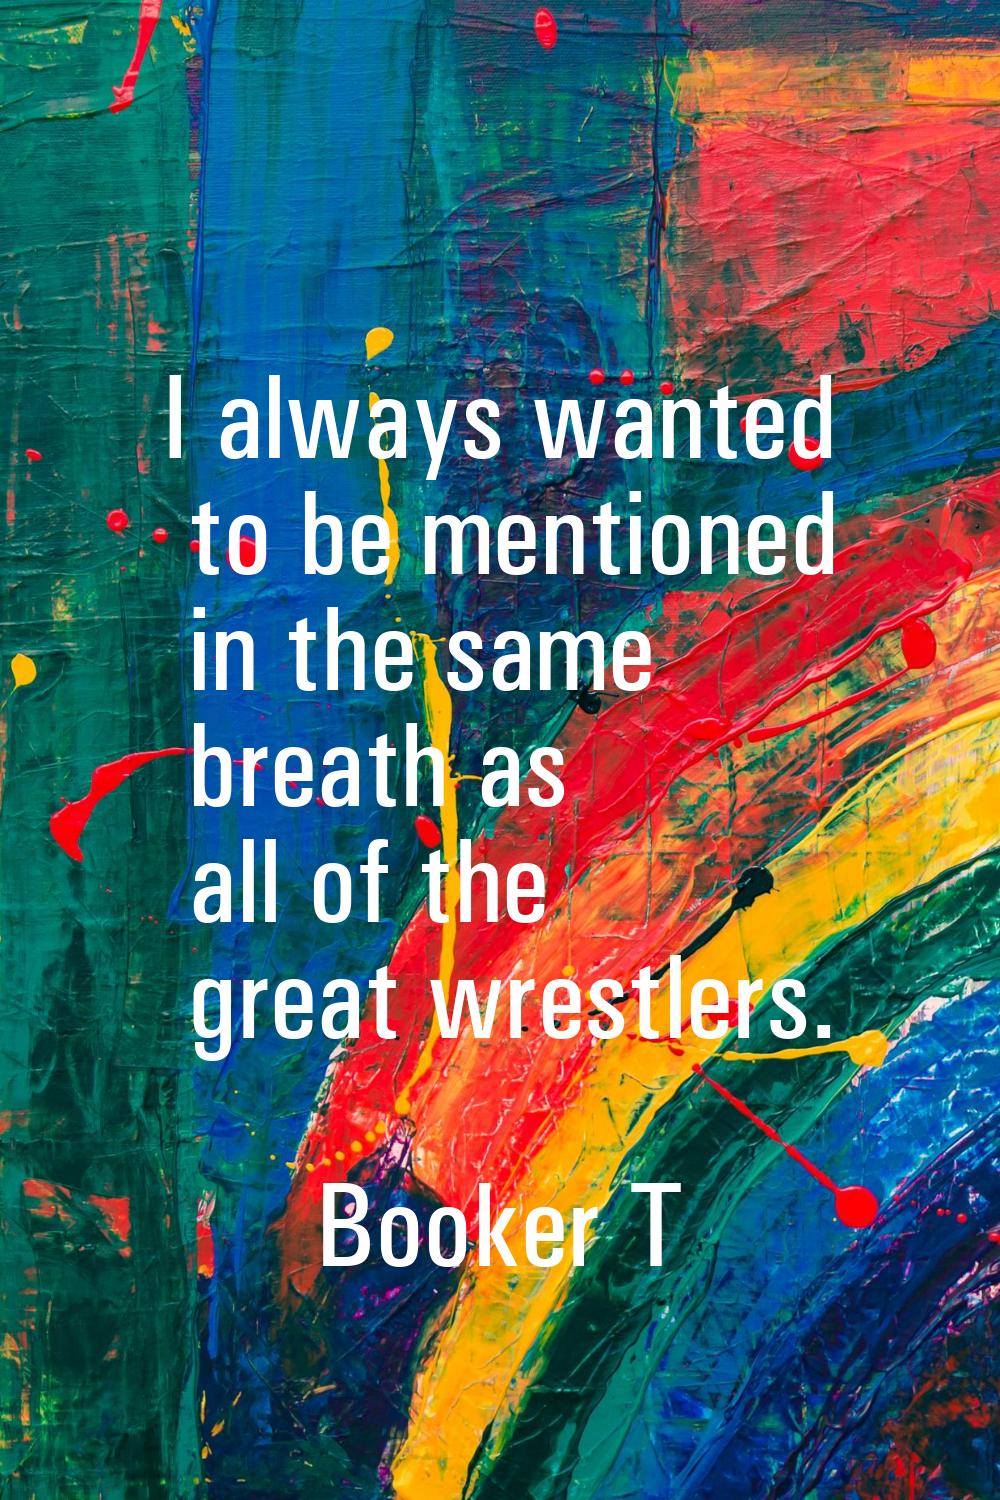 I always wanted to be mentioned in the same breath as all of the great wrestlers.